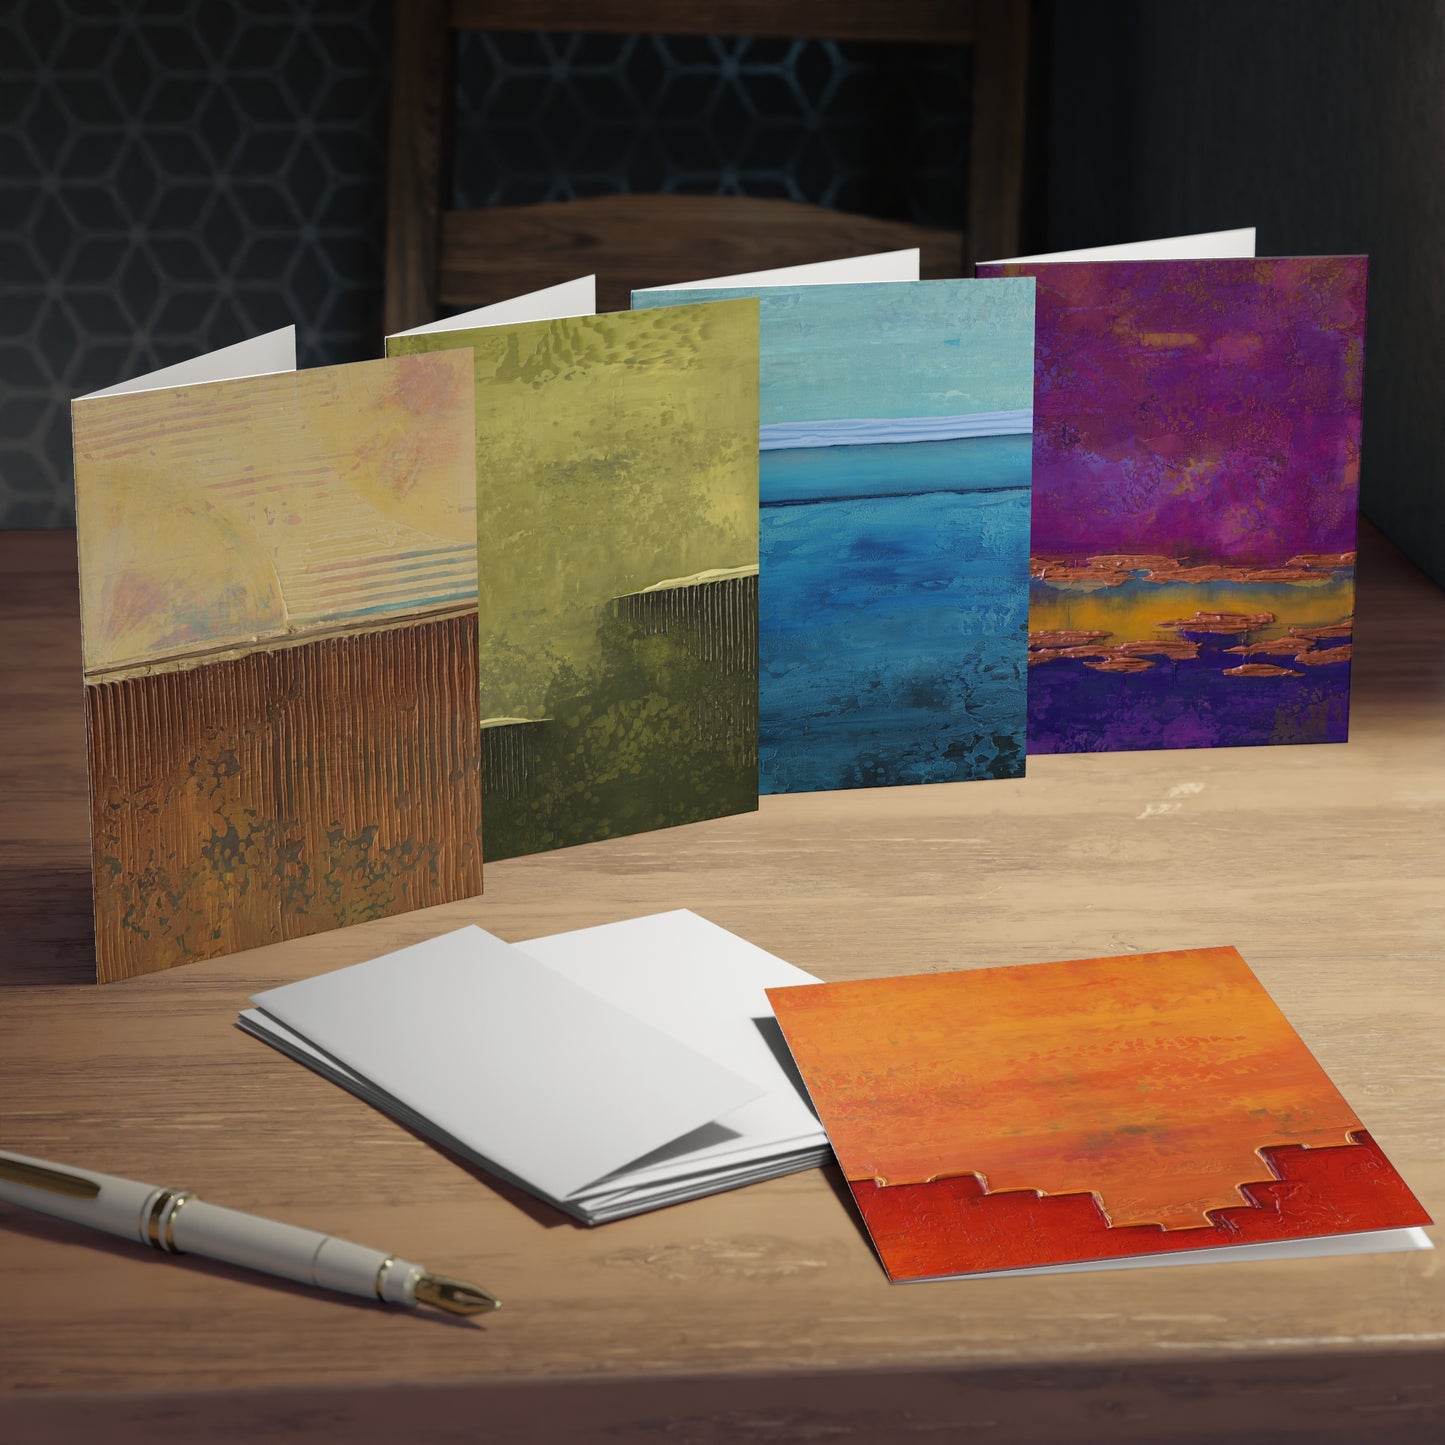 Rainbow Series - Greeting Cards (5-Pack) orange, yellow, green, blue, violet